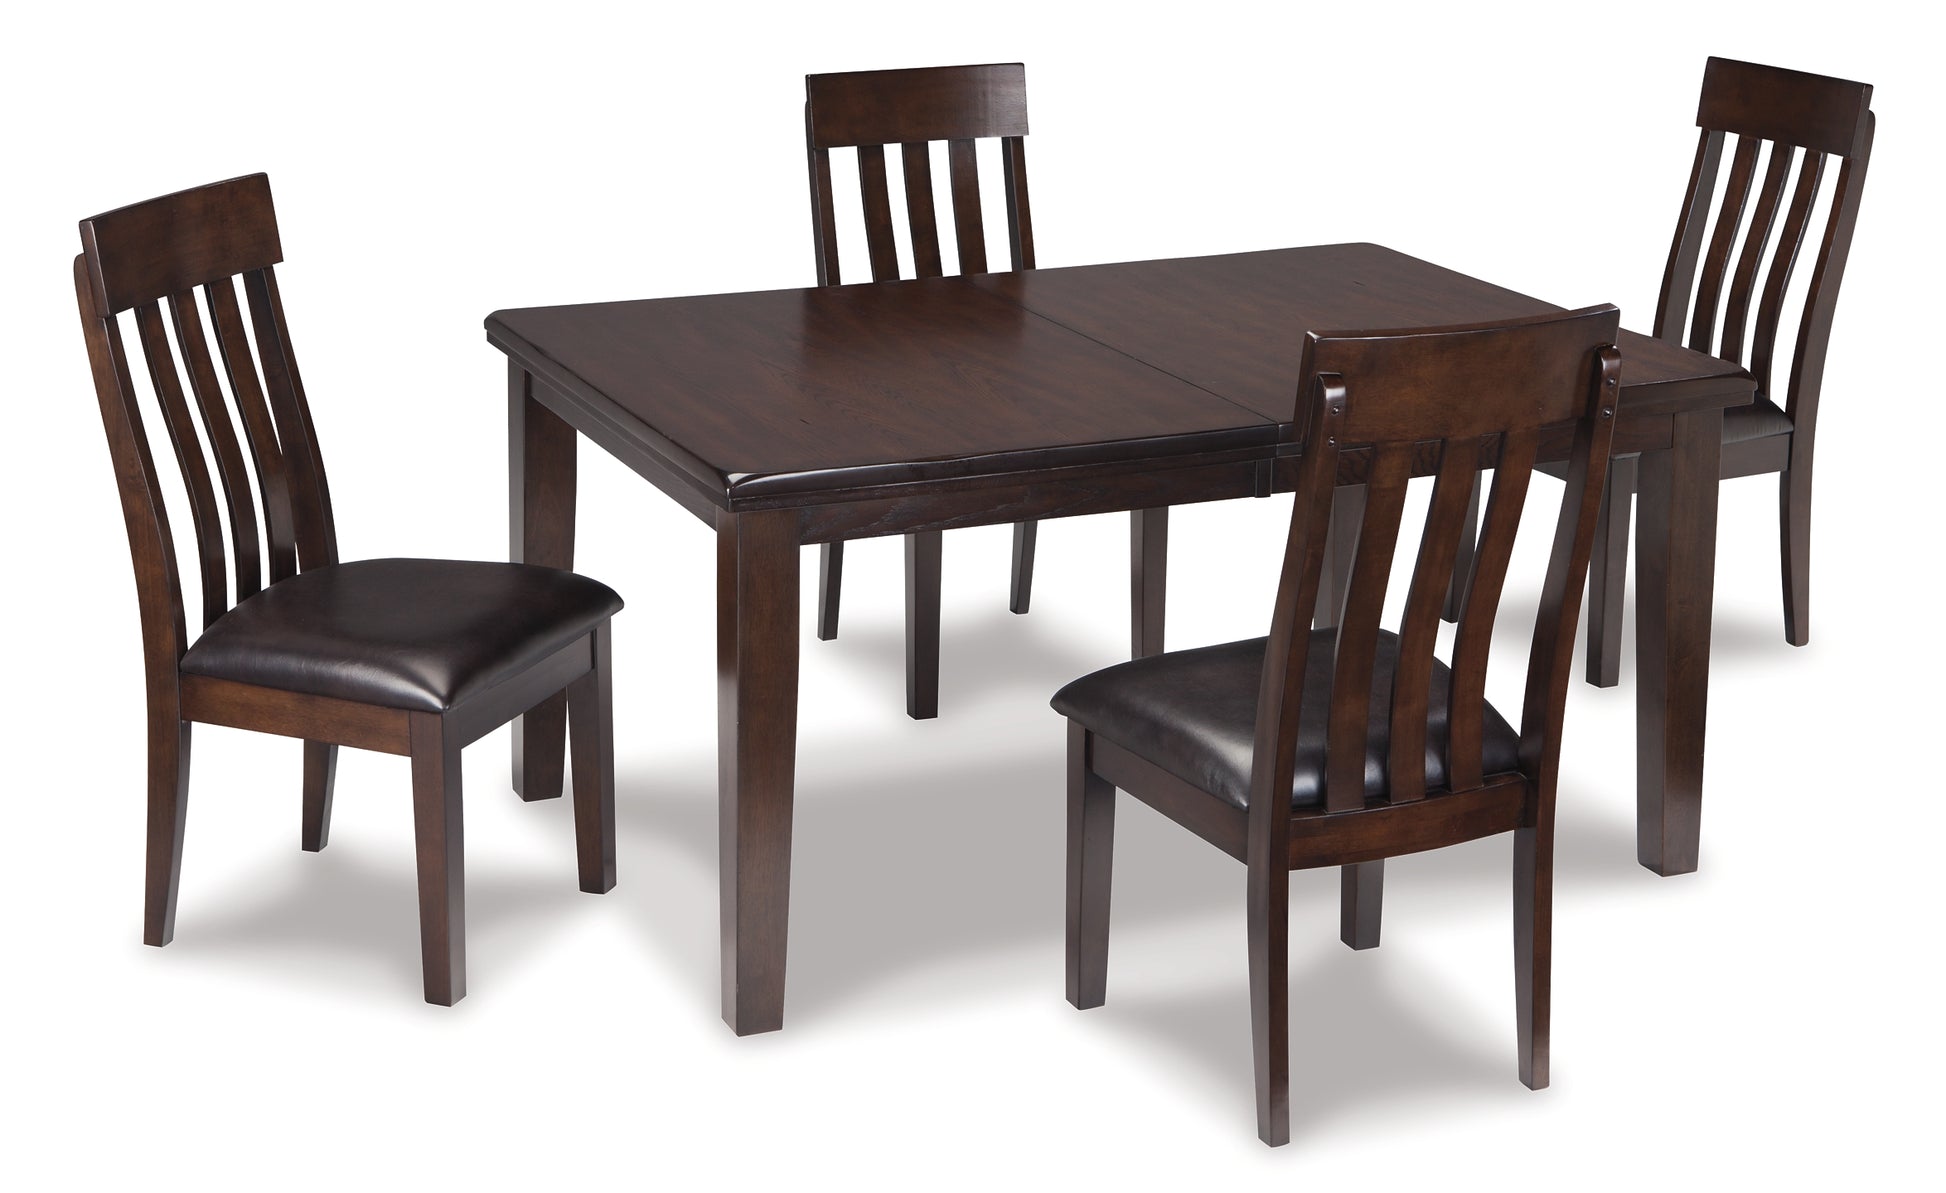 Haddigan Dining Table and 4 Chairs Wilson Furniture (OH)  in Bridgeport, Ohio. Serving Bridgeport, Yorkville, Bellaire, & Avondale